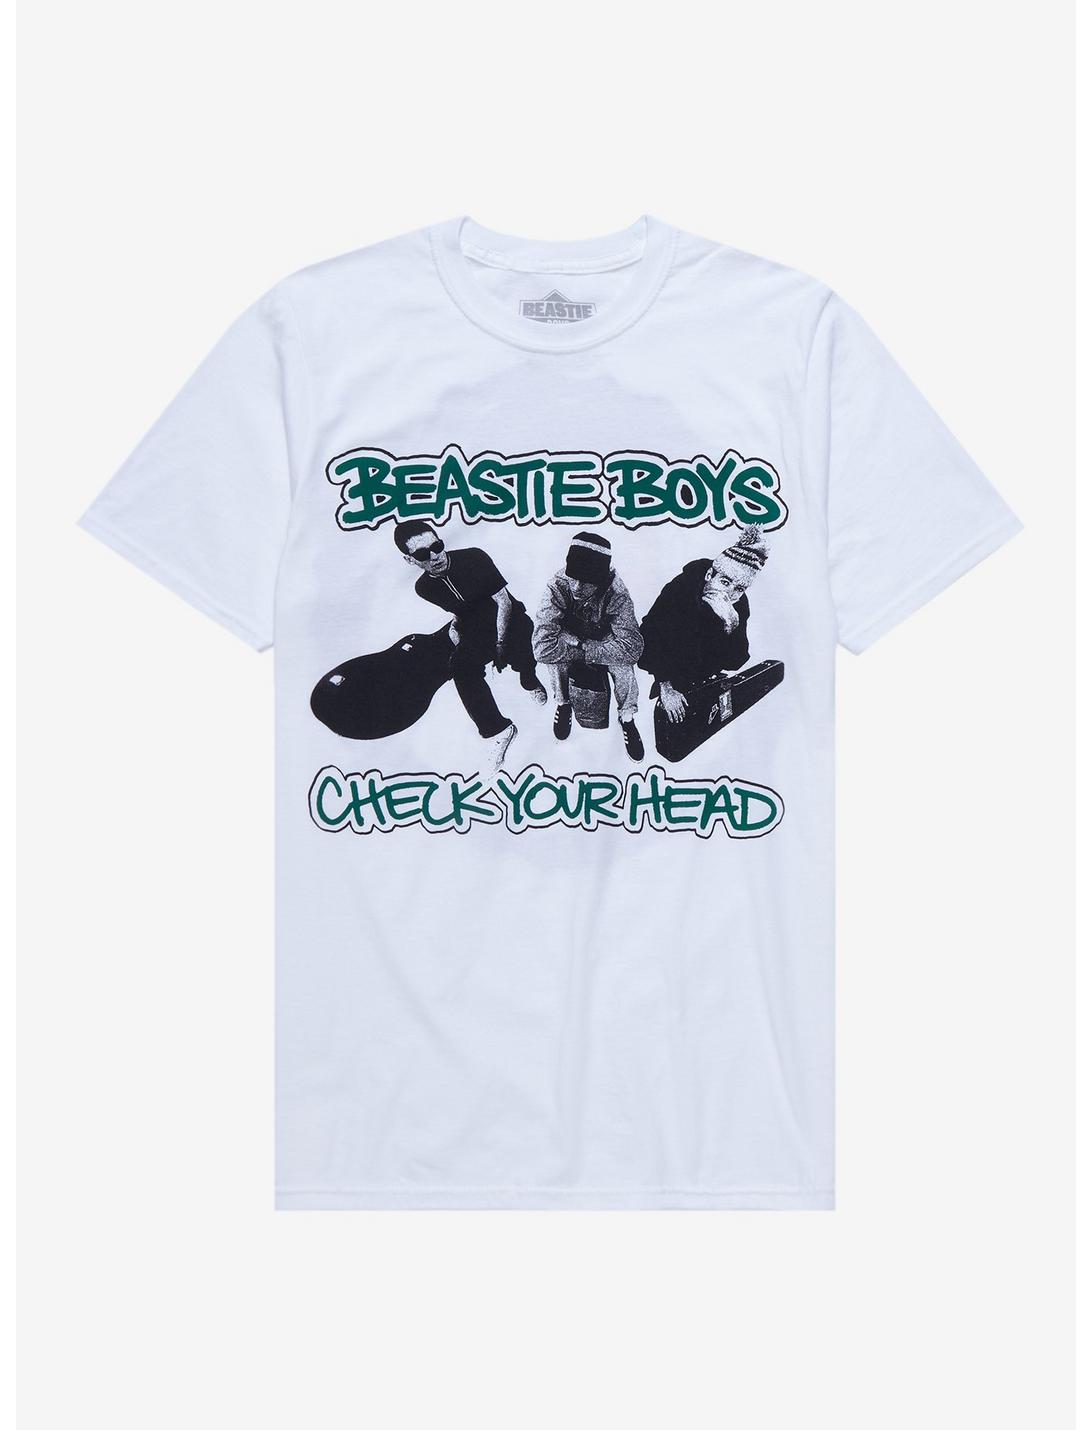 Beastie Boys Check Your Head T-Shirt, WHITE, hi-res